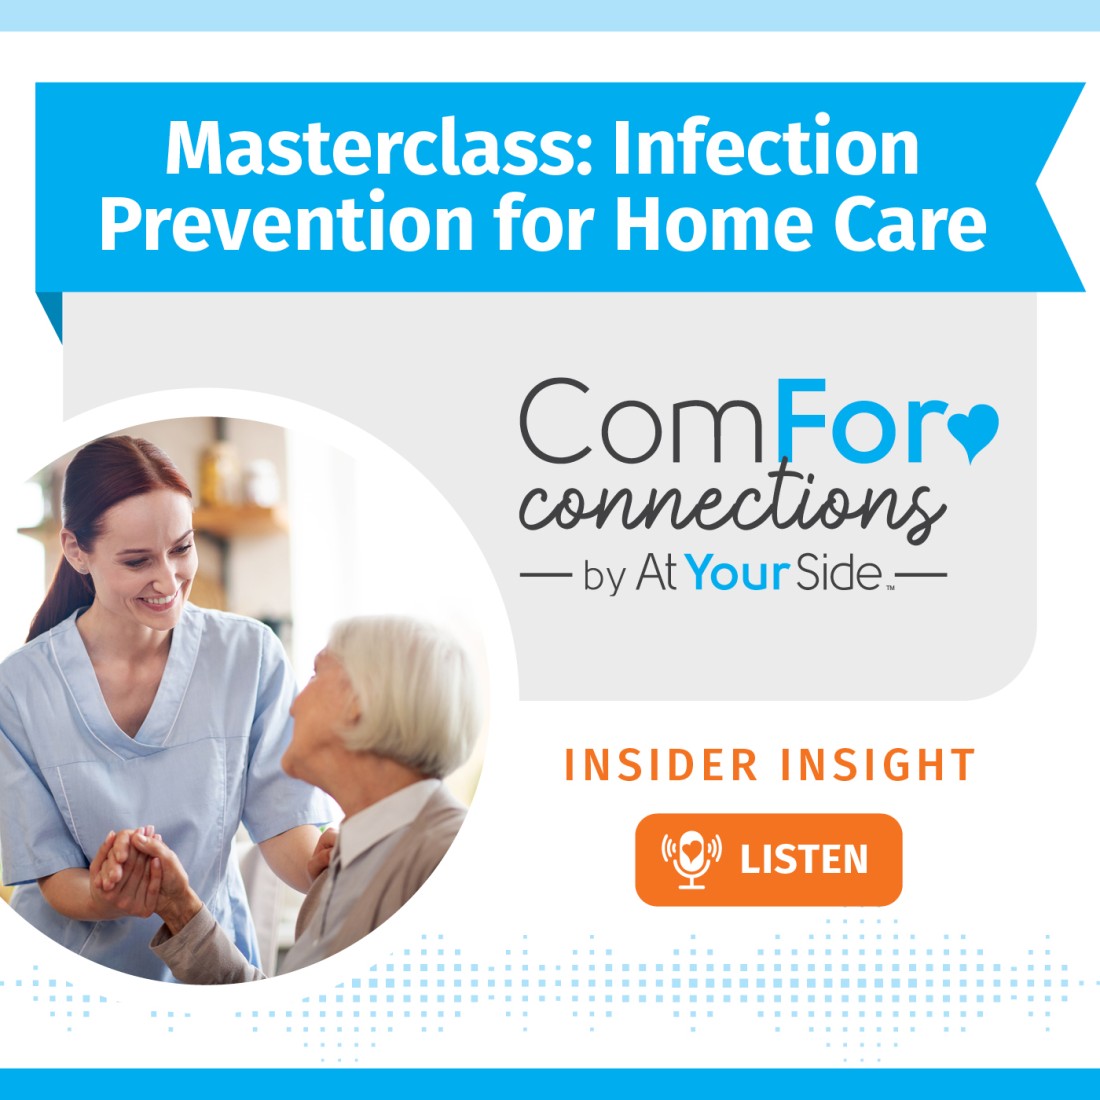 Podcast Resources: Expanding Your Home Care Knowledge - Social_Media__Best_Practice_Infection_Prevention_for_Home_Care_(1)